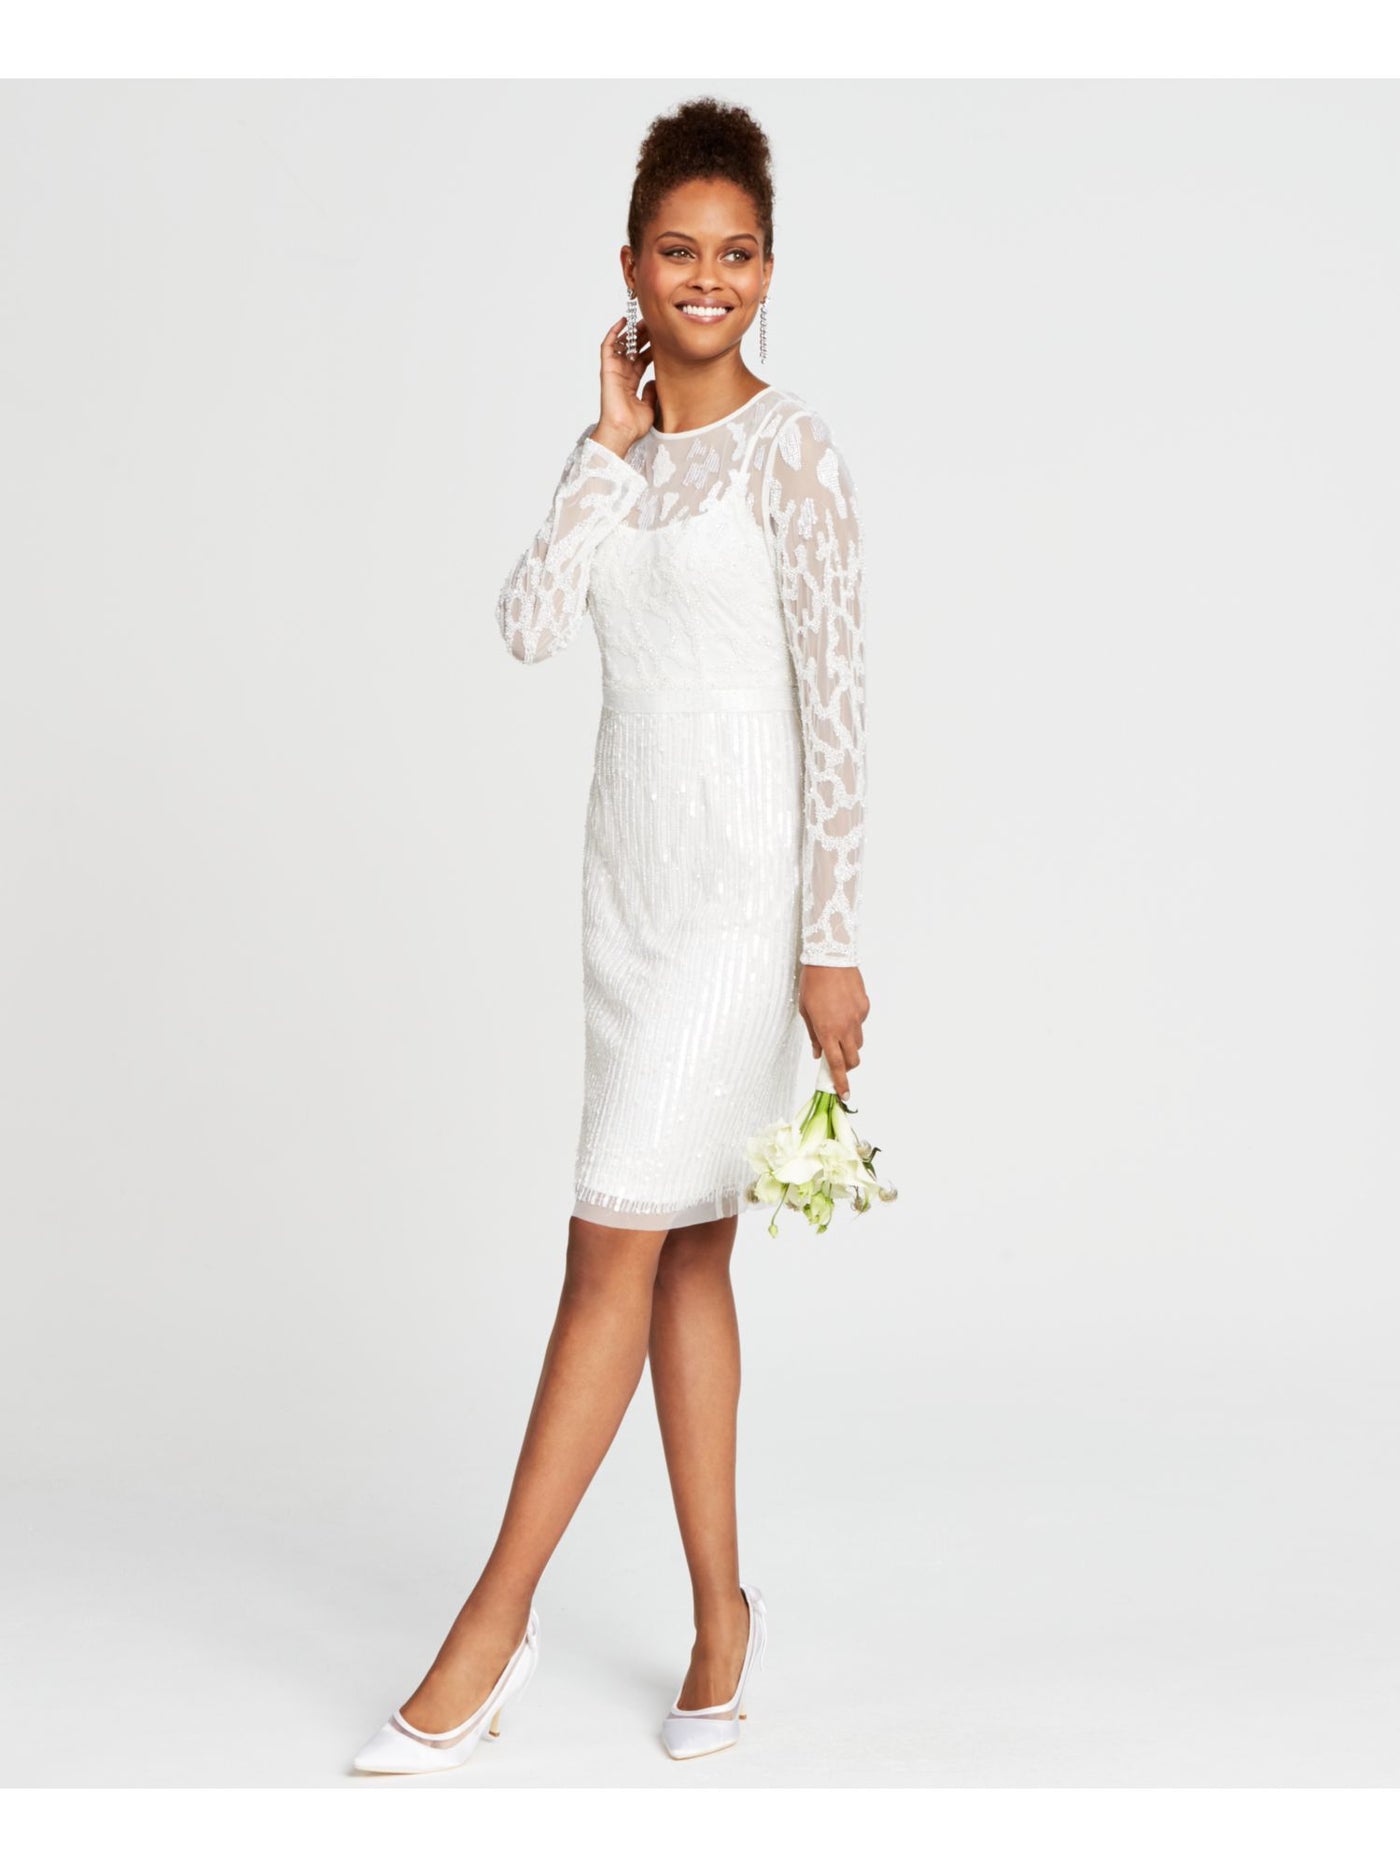 ADRIANNA PAPELL Womens White Beaded Sequined Zippered Printed Long Sleeve Illusion Neckline Above The Knee Formal Sheath Dress 10